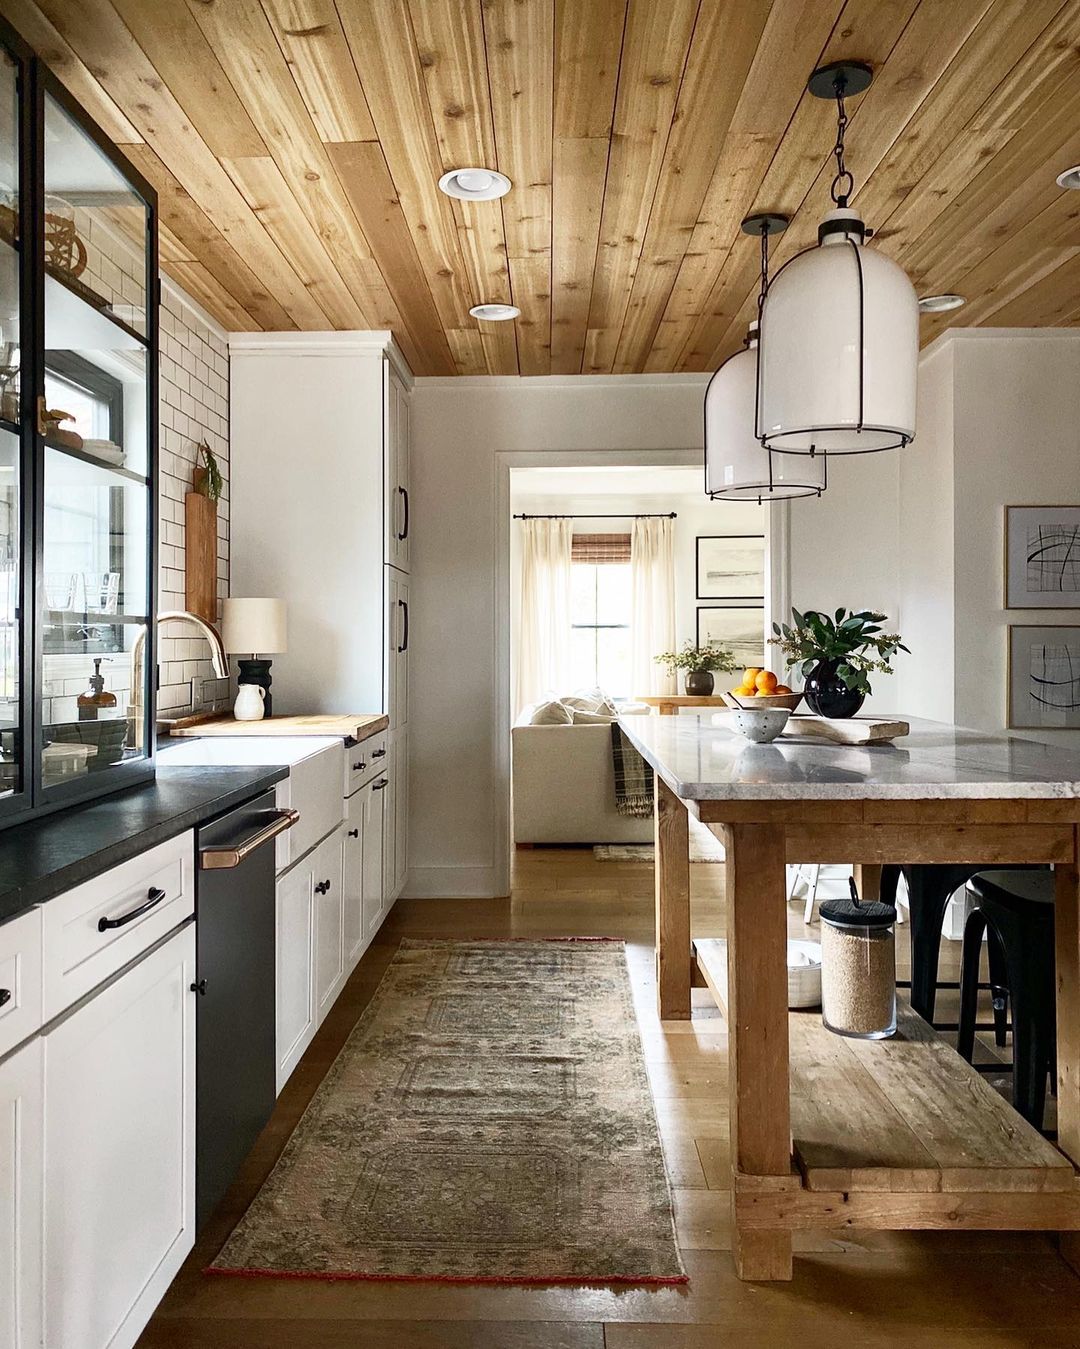 Farmhouse Kitchen with Wood Ceiling. Photo by Instagram user @housesevendesign